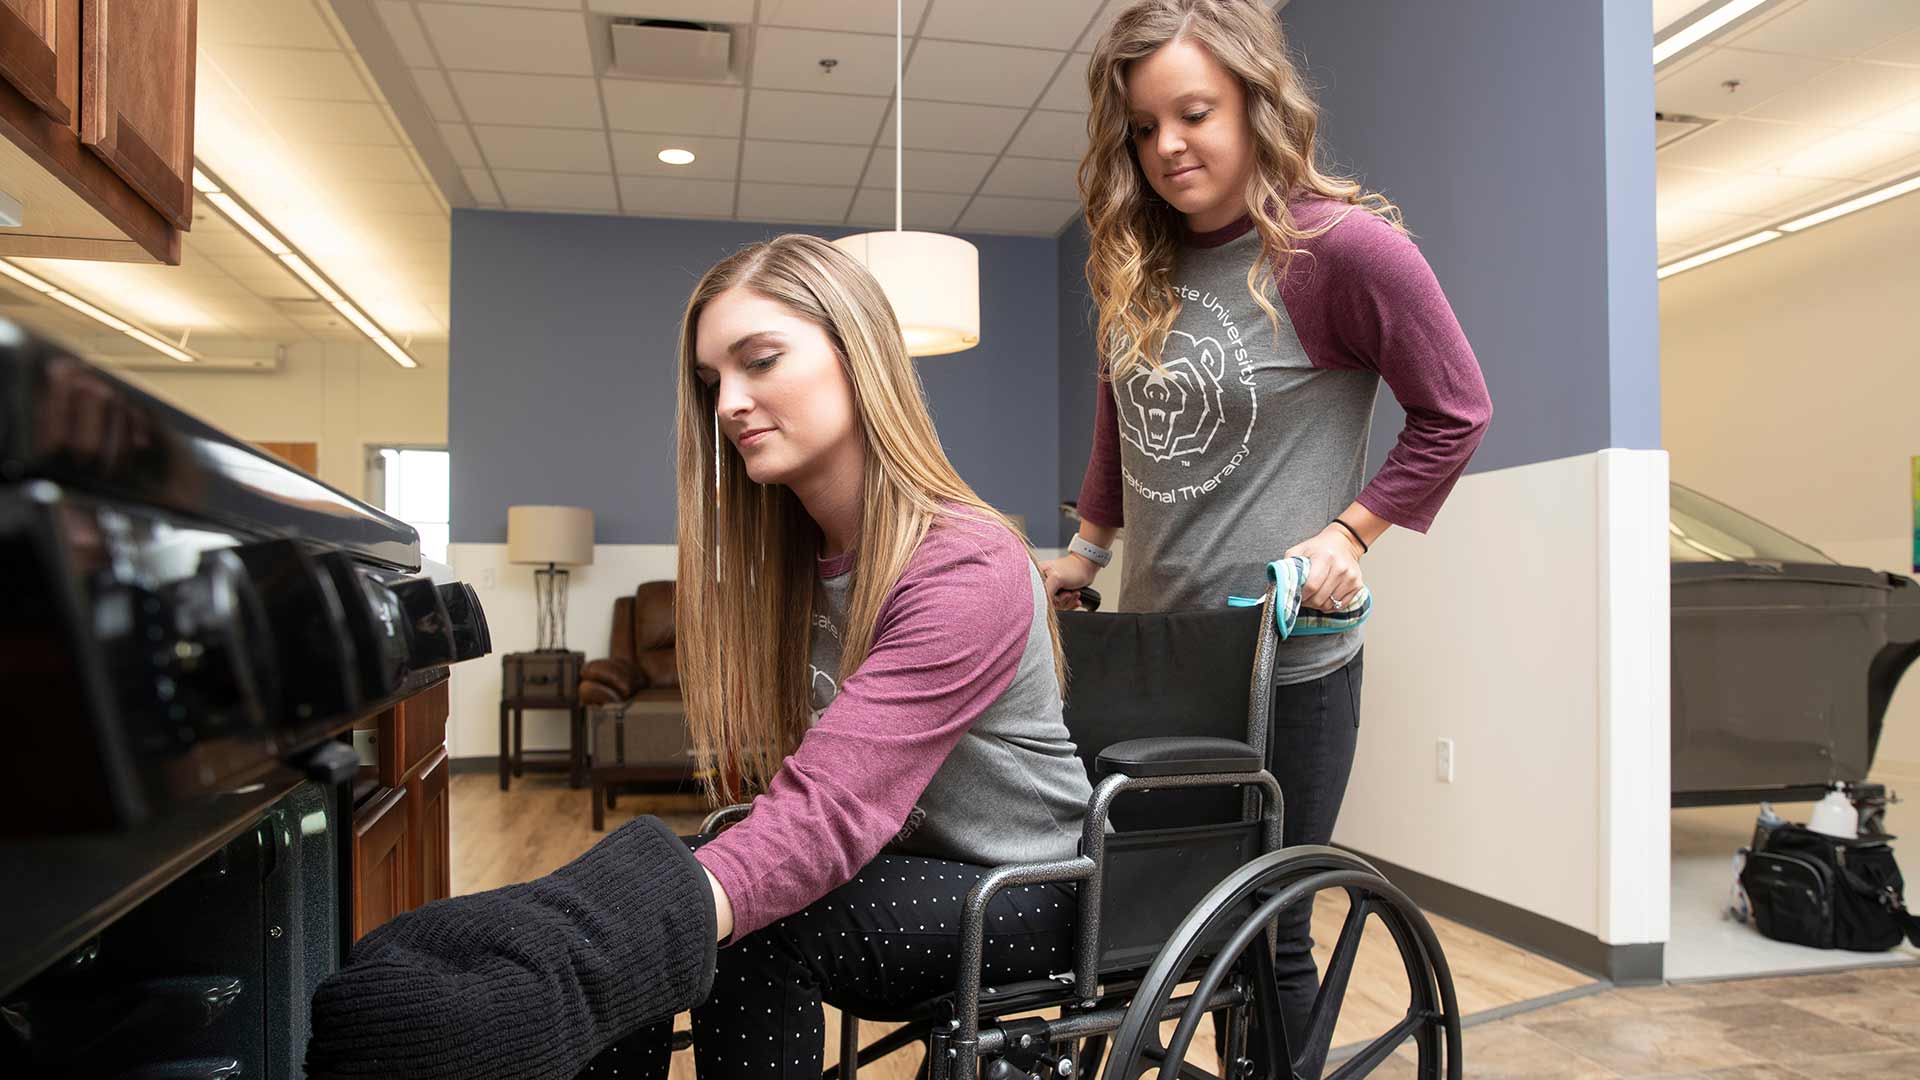 Occupational therapy student in a wheelchair using kitchen equipment while another student assists her.